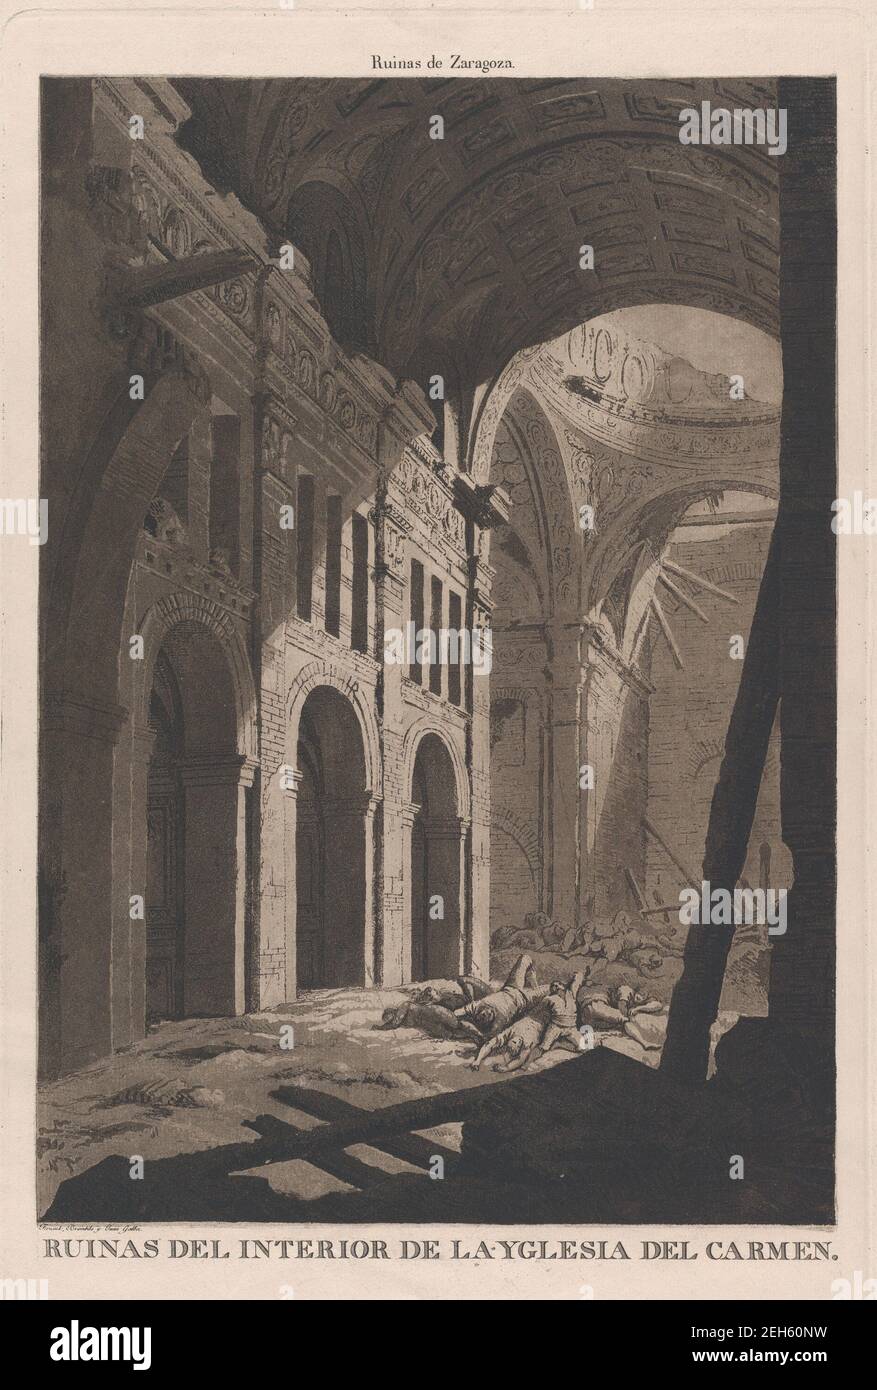 View of the ruins of the interior of the Church of Nuestra Senora del Carmen in Saragossa bombed by the invading French army during the Napoleonic war, 1808-14. Stock Photo